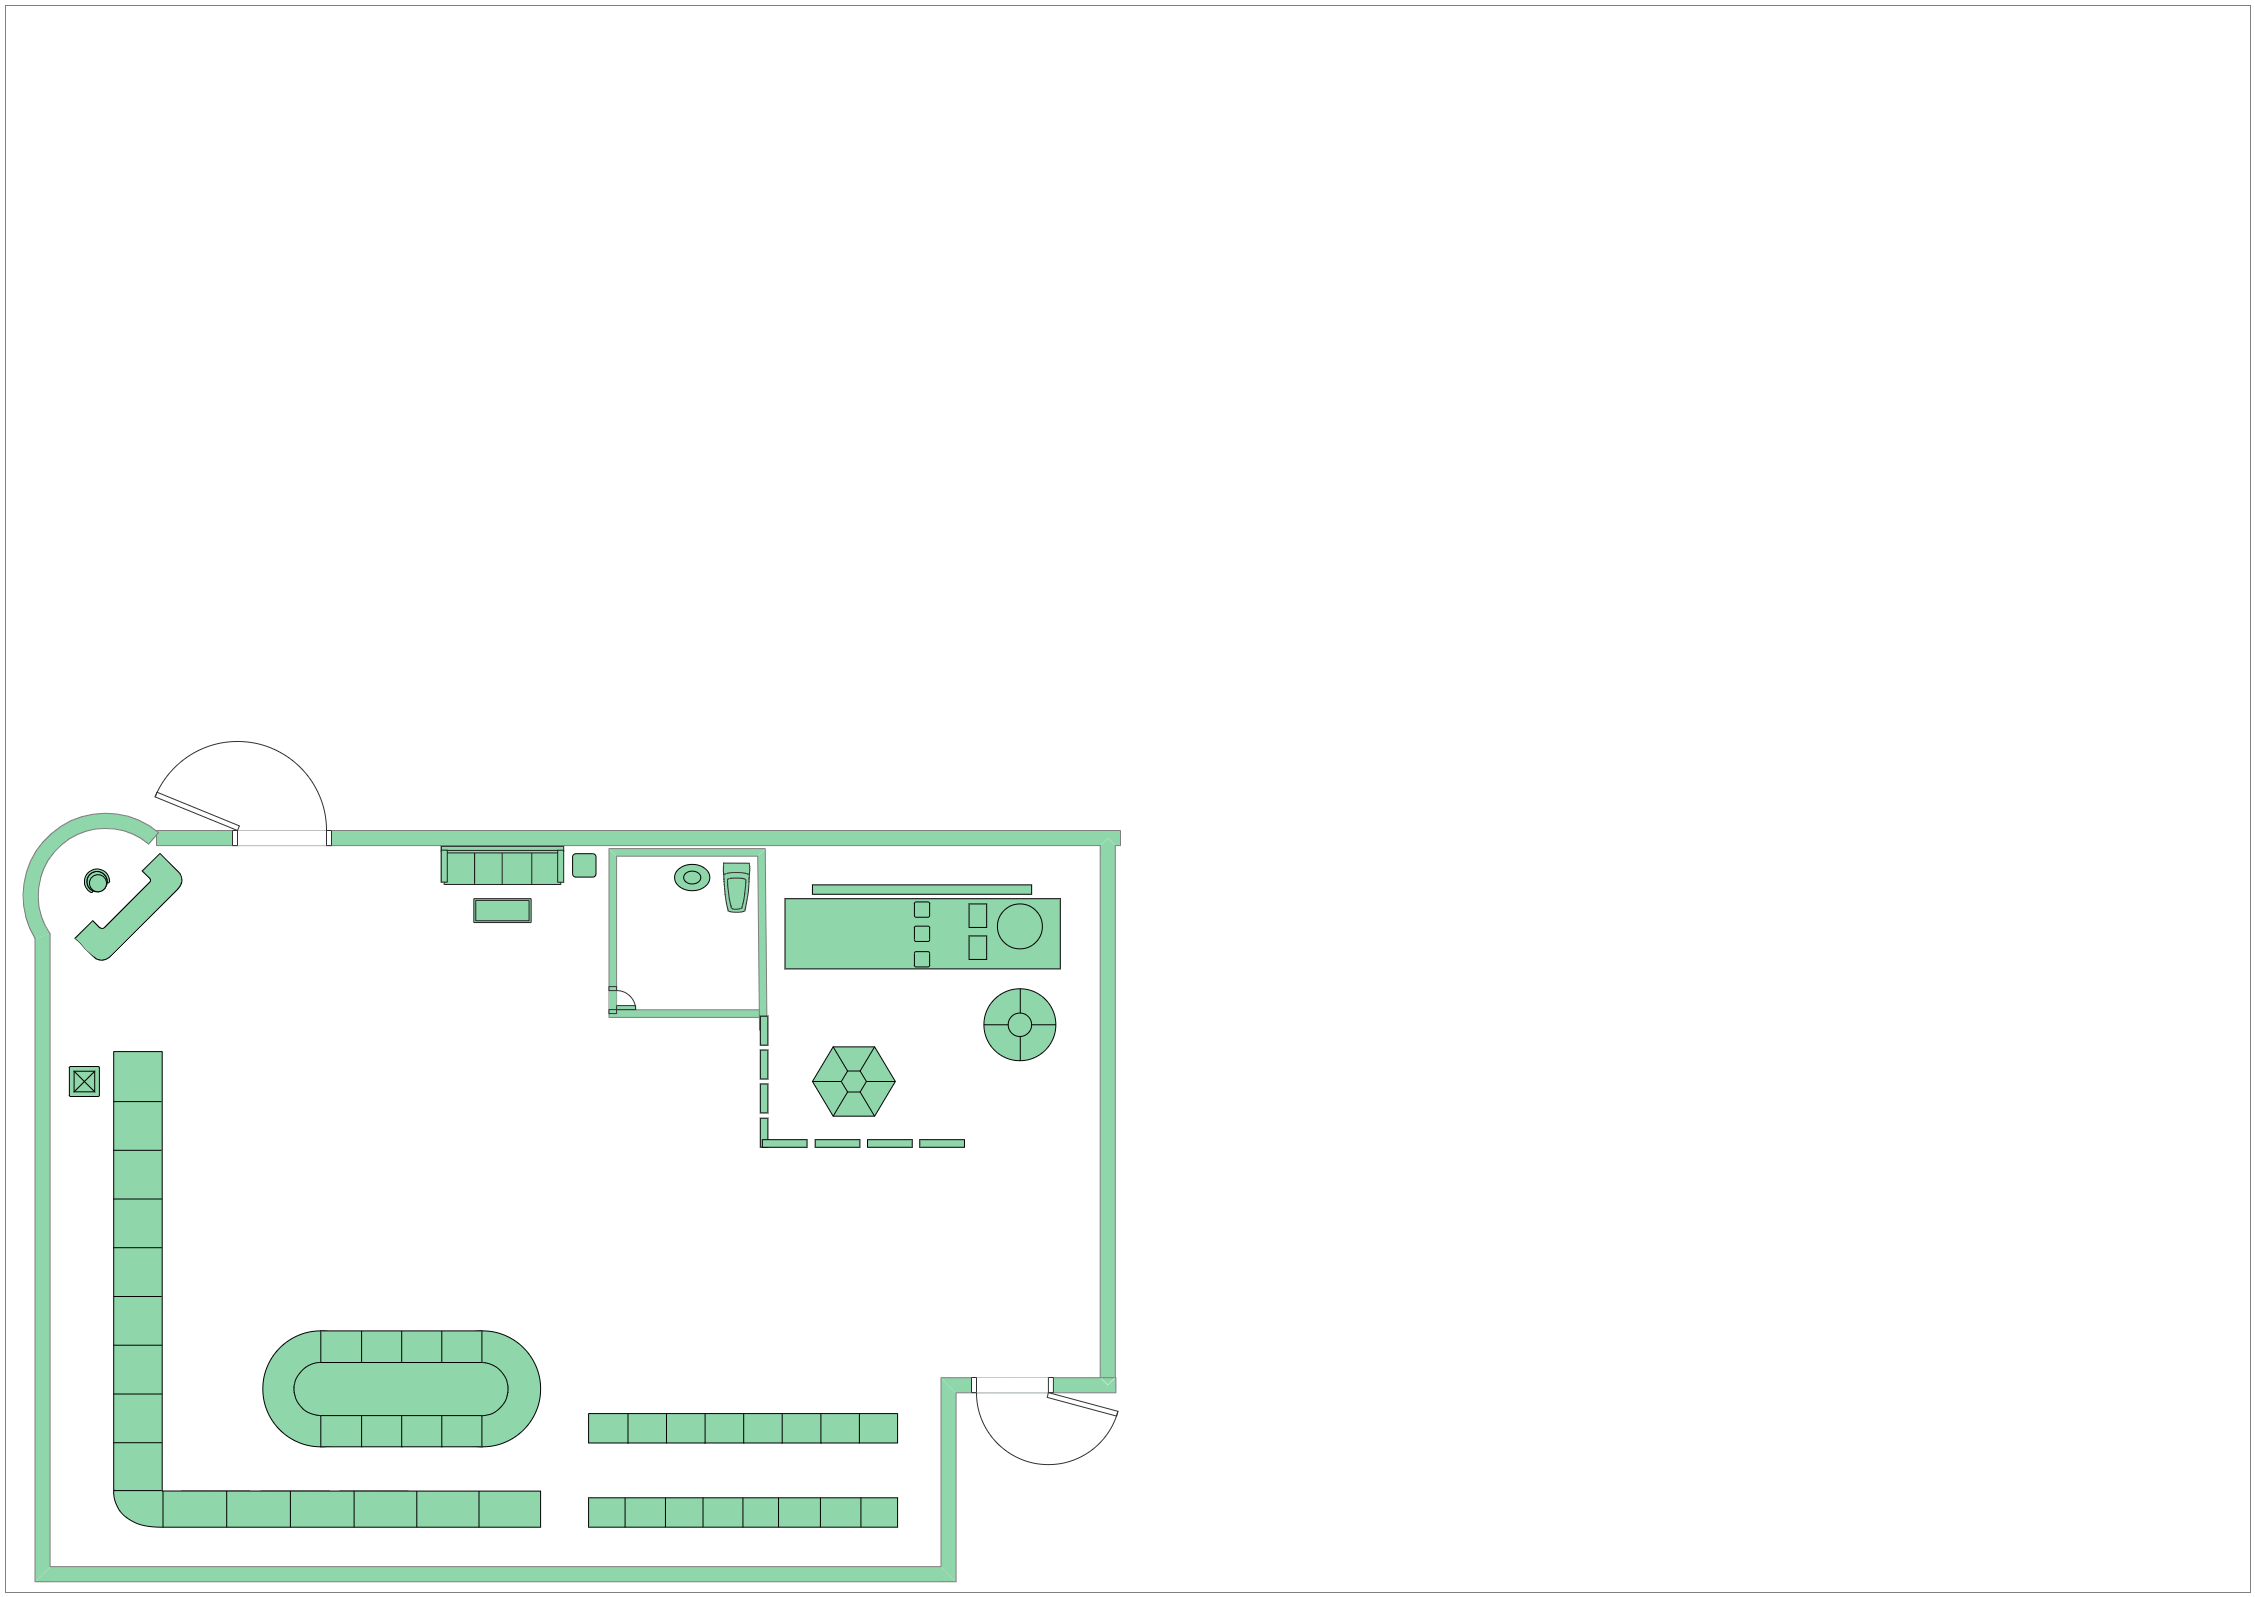 There are a couple of things that you should know before you make the computer room floor plan. The computer room floor plan should be clear and easy to read, organize, and create so the viewer can easily pinpoint their name and their assigned seat. As th